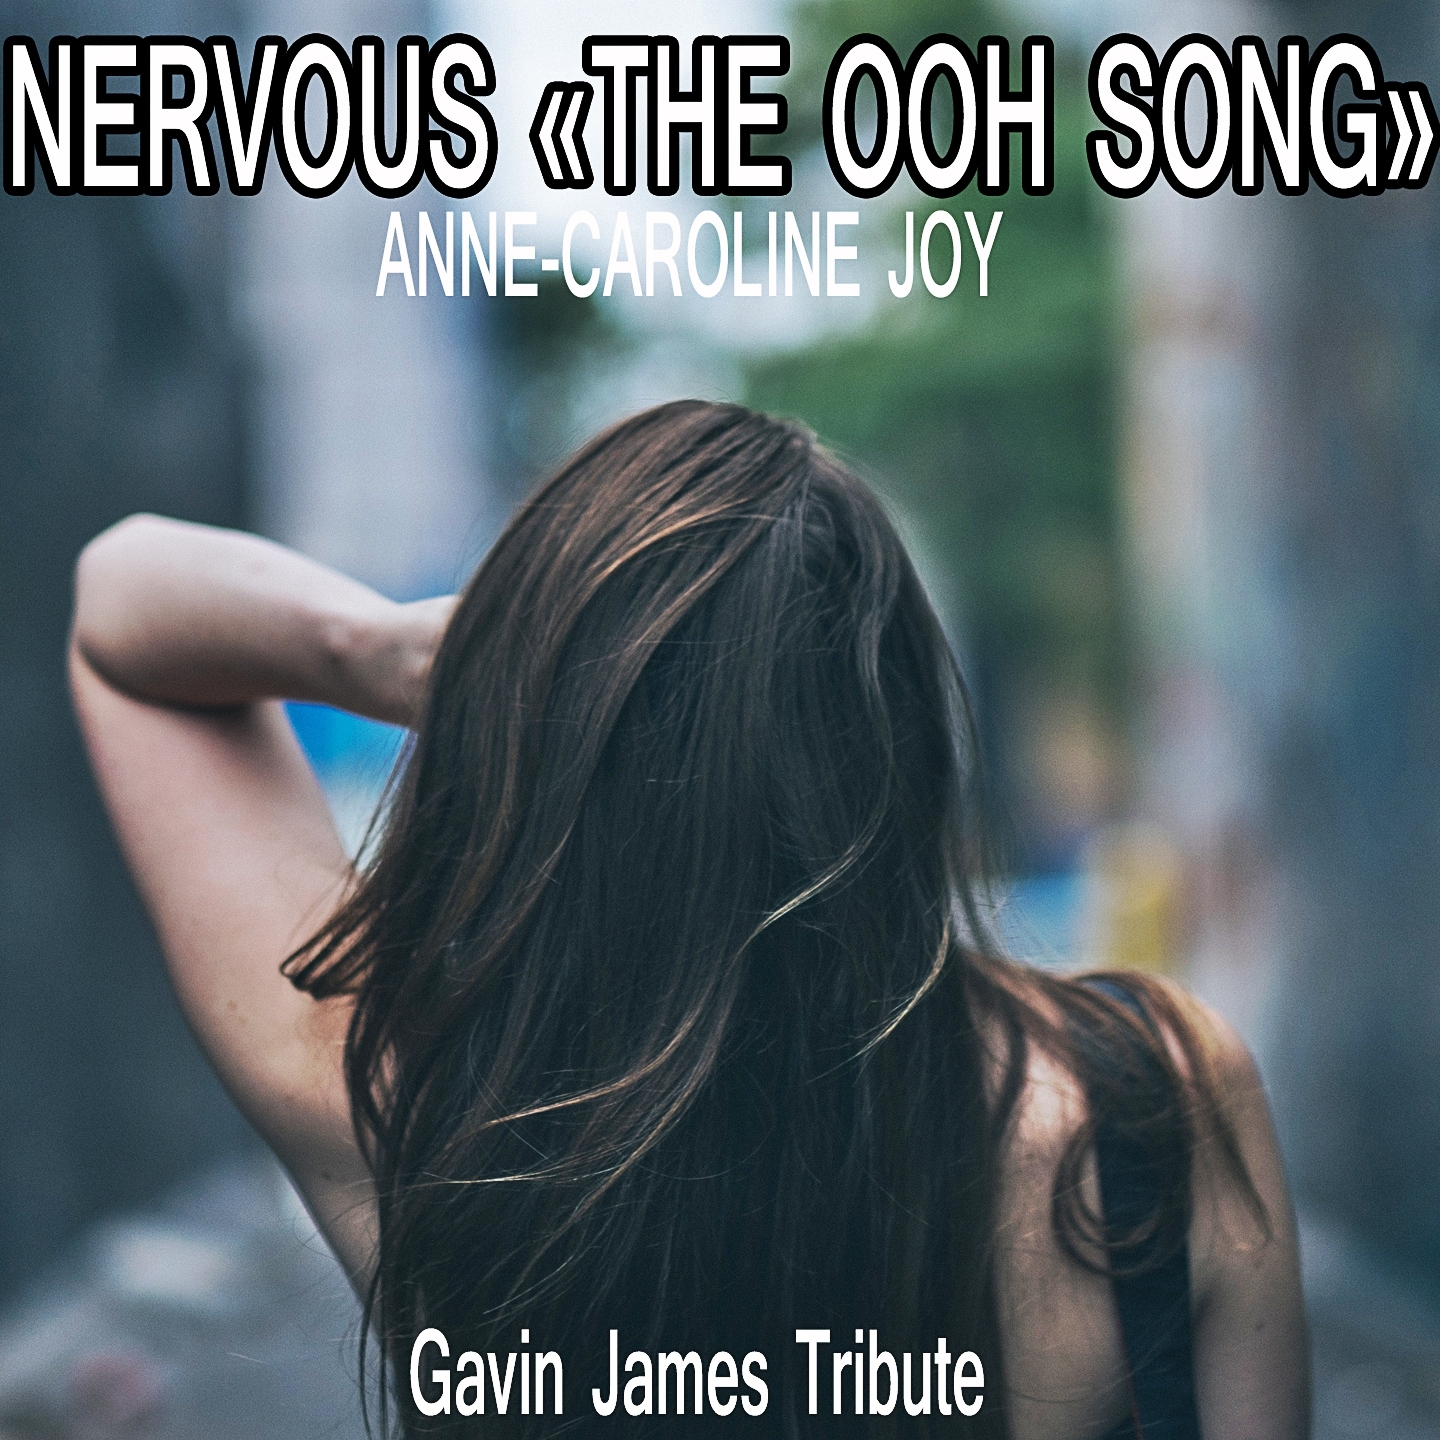 Nervous (The Ooh Song)